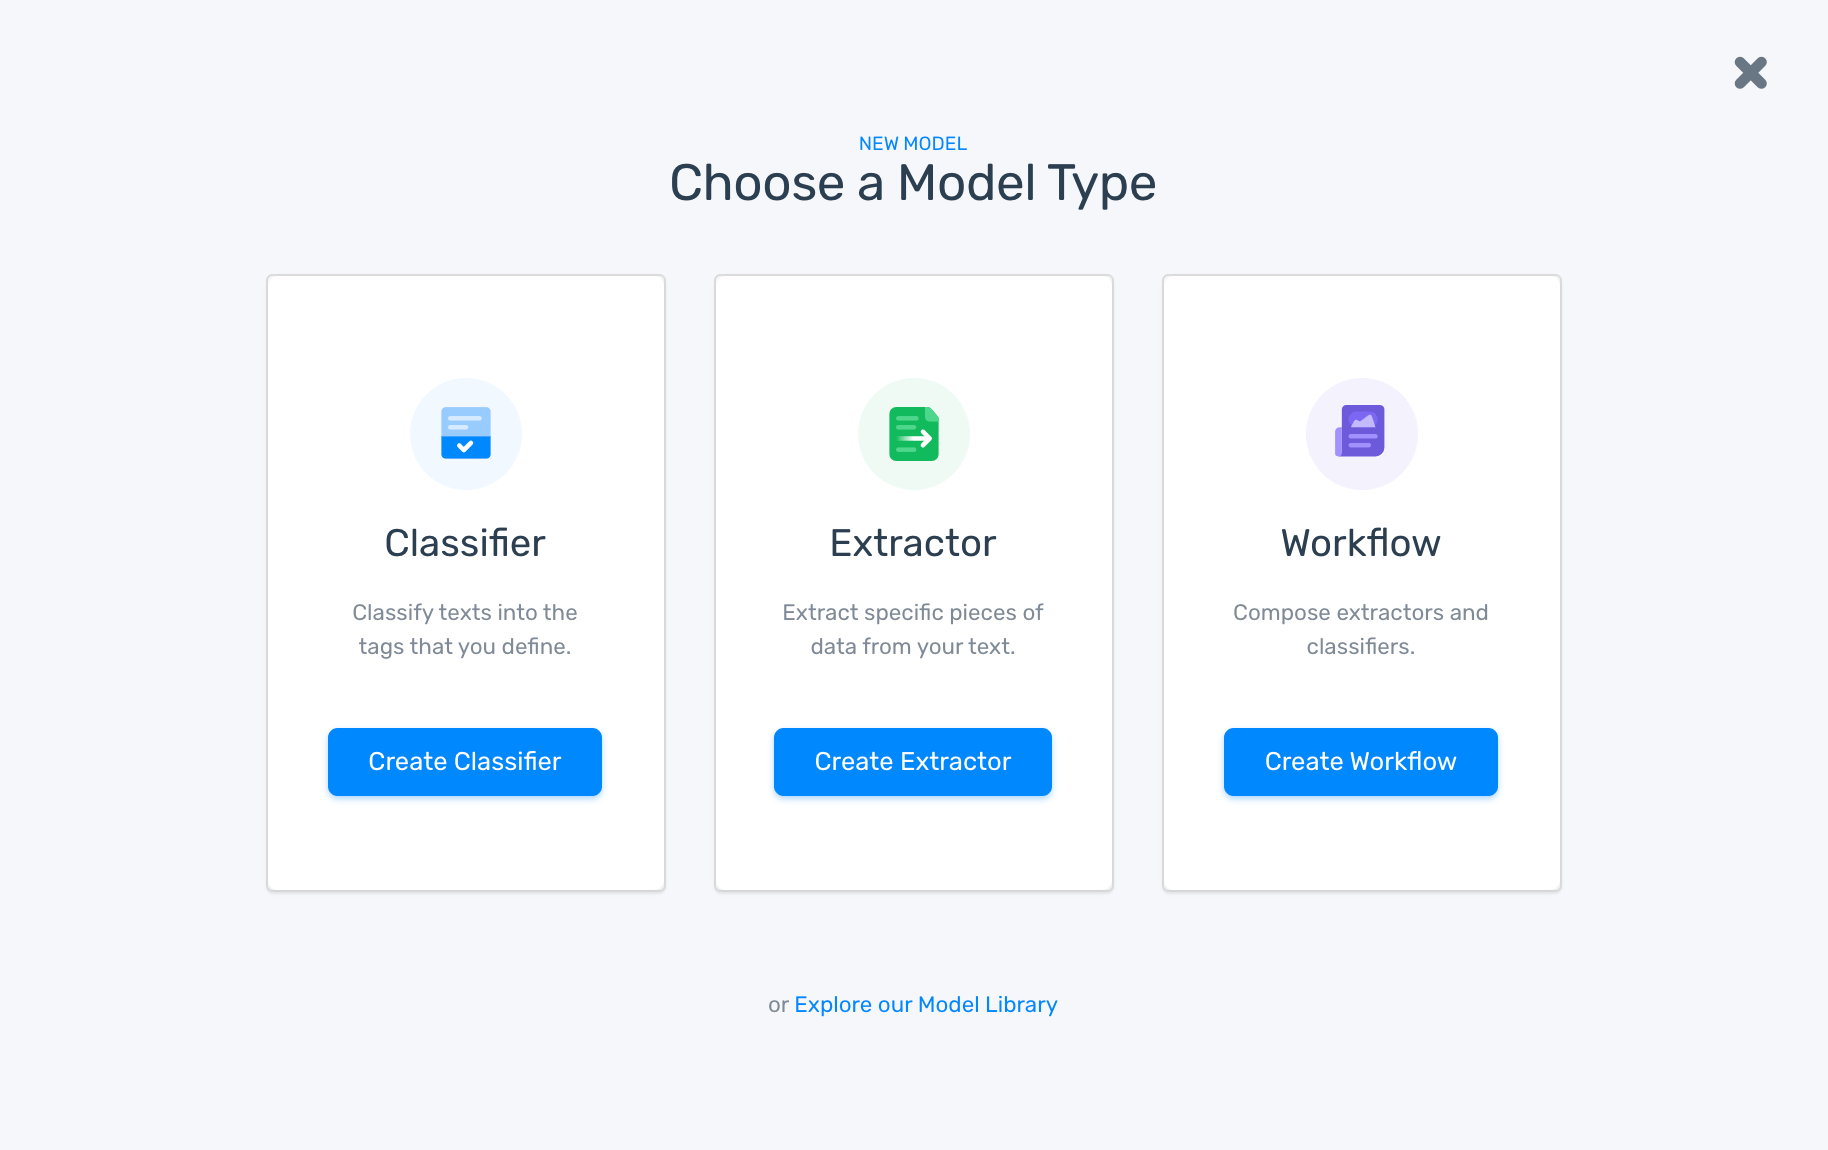 The option to choose a 'Classifier' or 'Extractor' text analysis model.